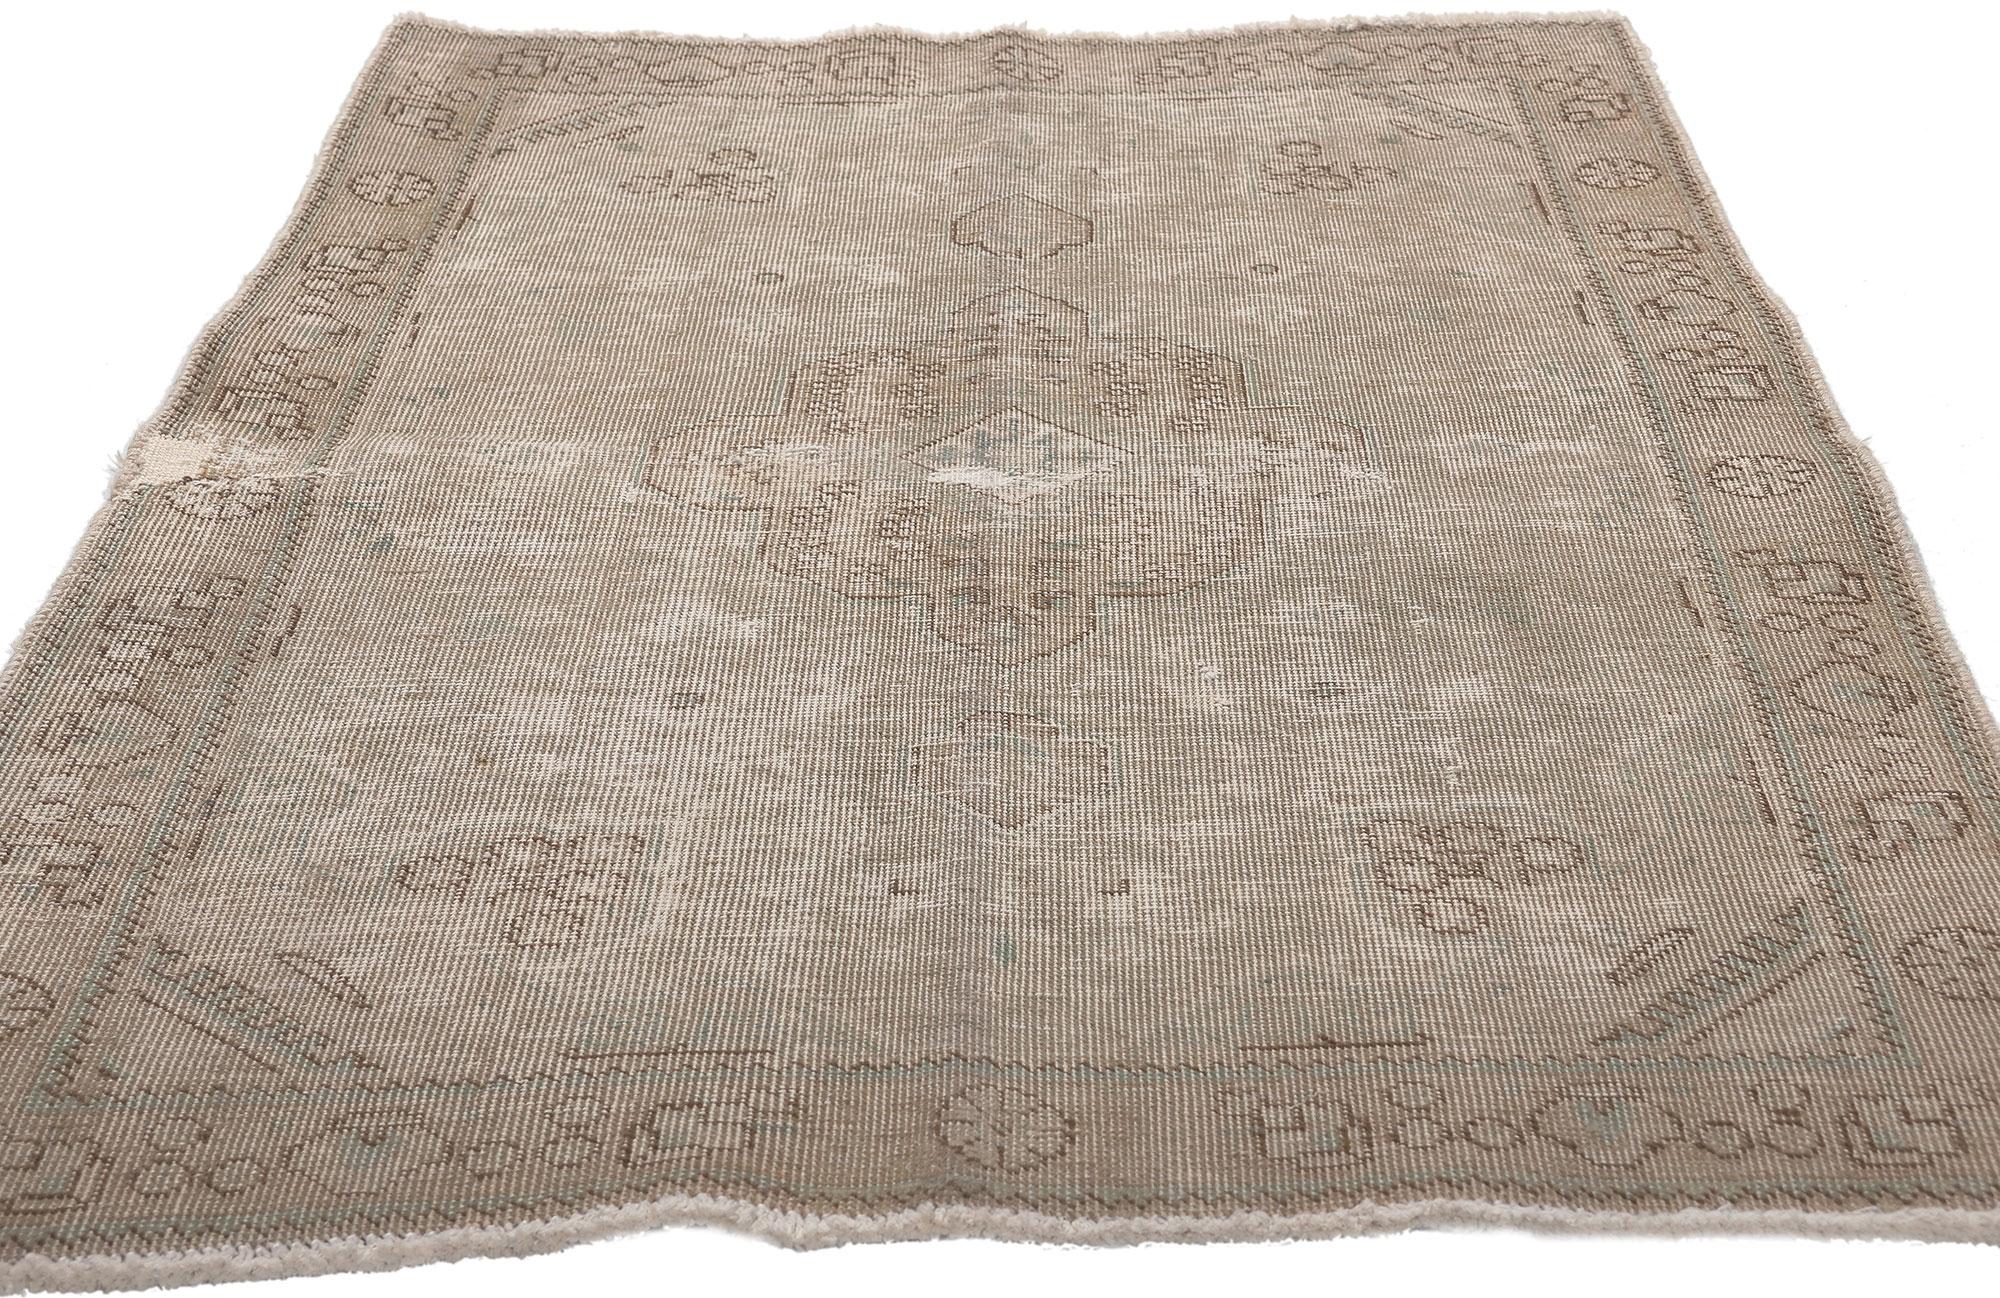 Tabriz Distressed Faded Vintage Persian Rug, Earth-Tone Elegance Meets Modern Luxe For Sale